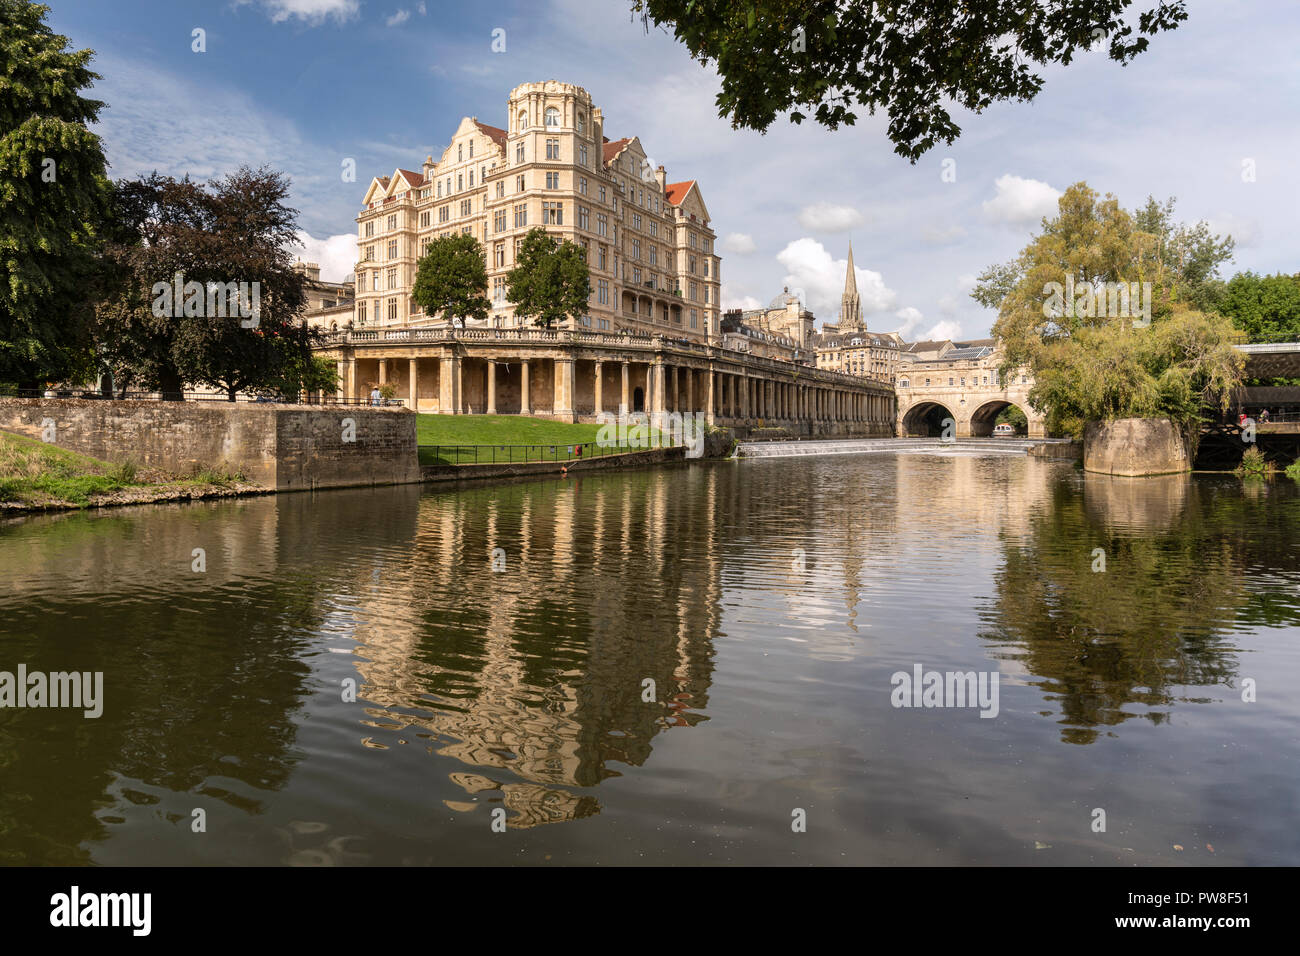 Pulteney Bridge and weir, Grand Parade and riverside vaults all seen with reflections in the River Avon, City of Bath, Somerset, England, UK Stock Photo